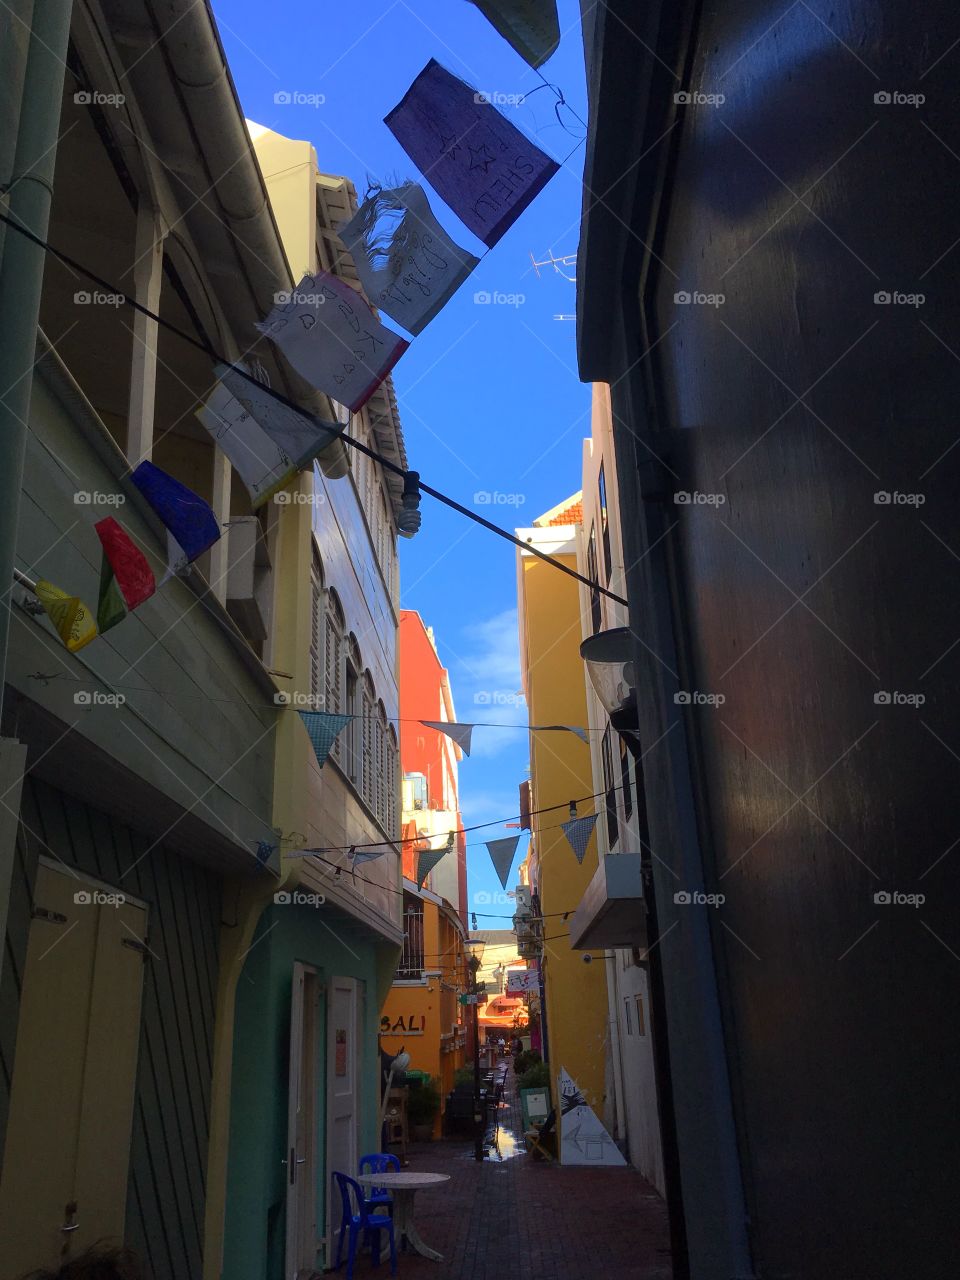 One of the many alleyways found in Willemstad, Curacao 